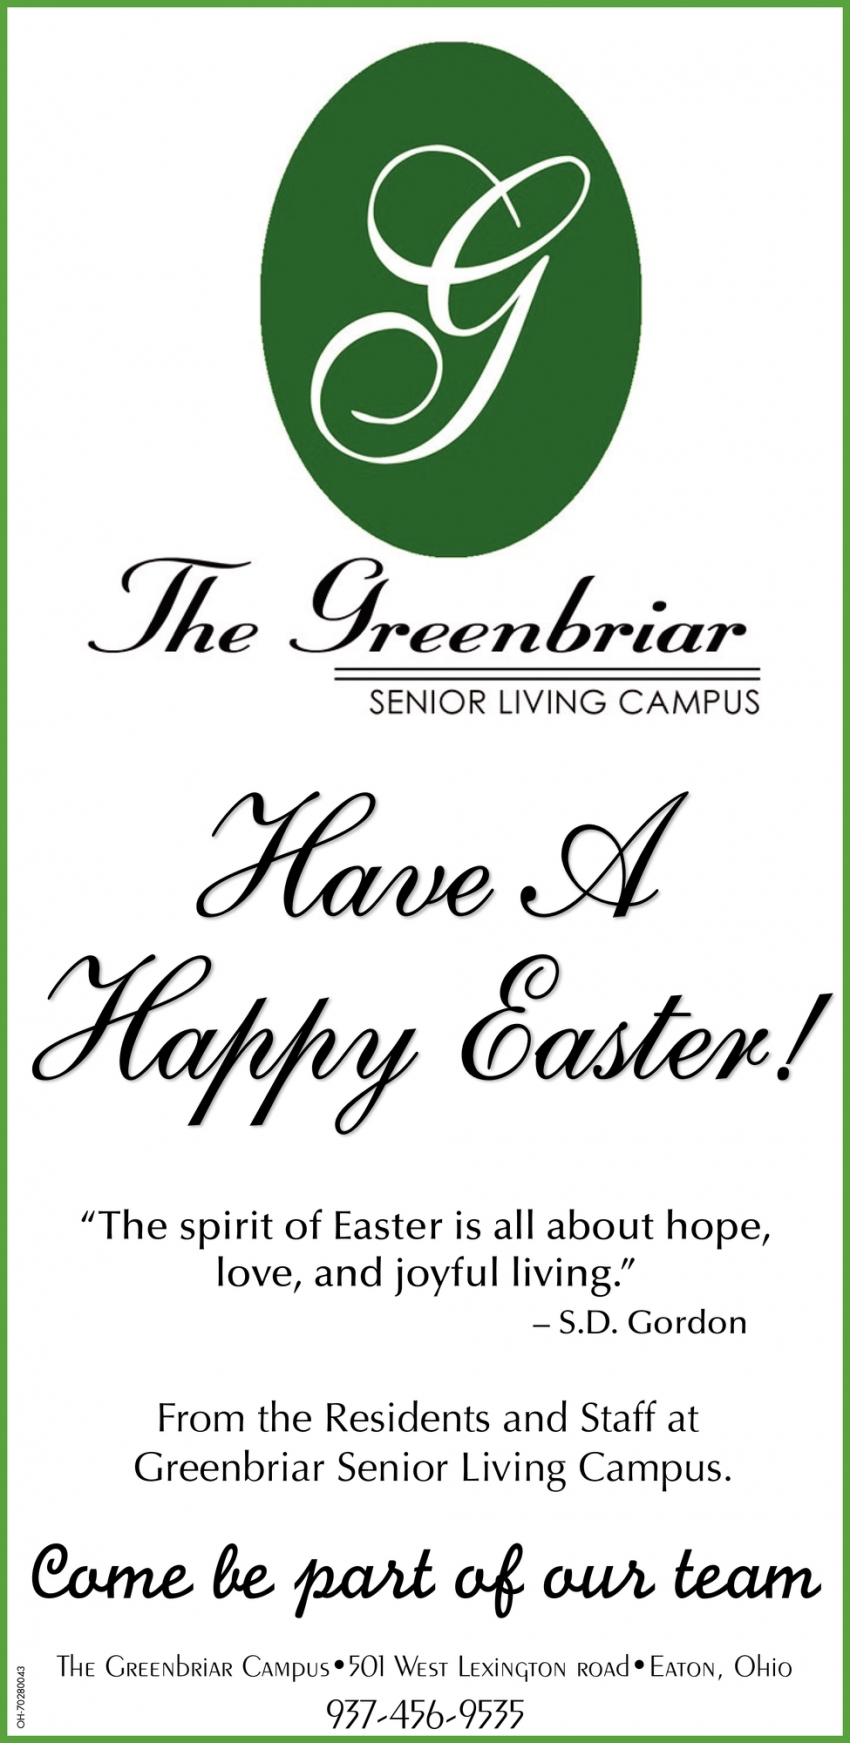 Have A Happy Easter!